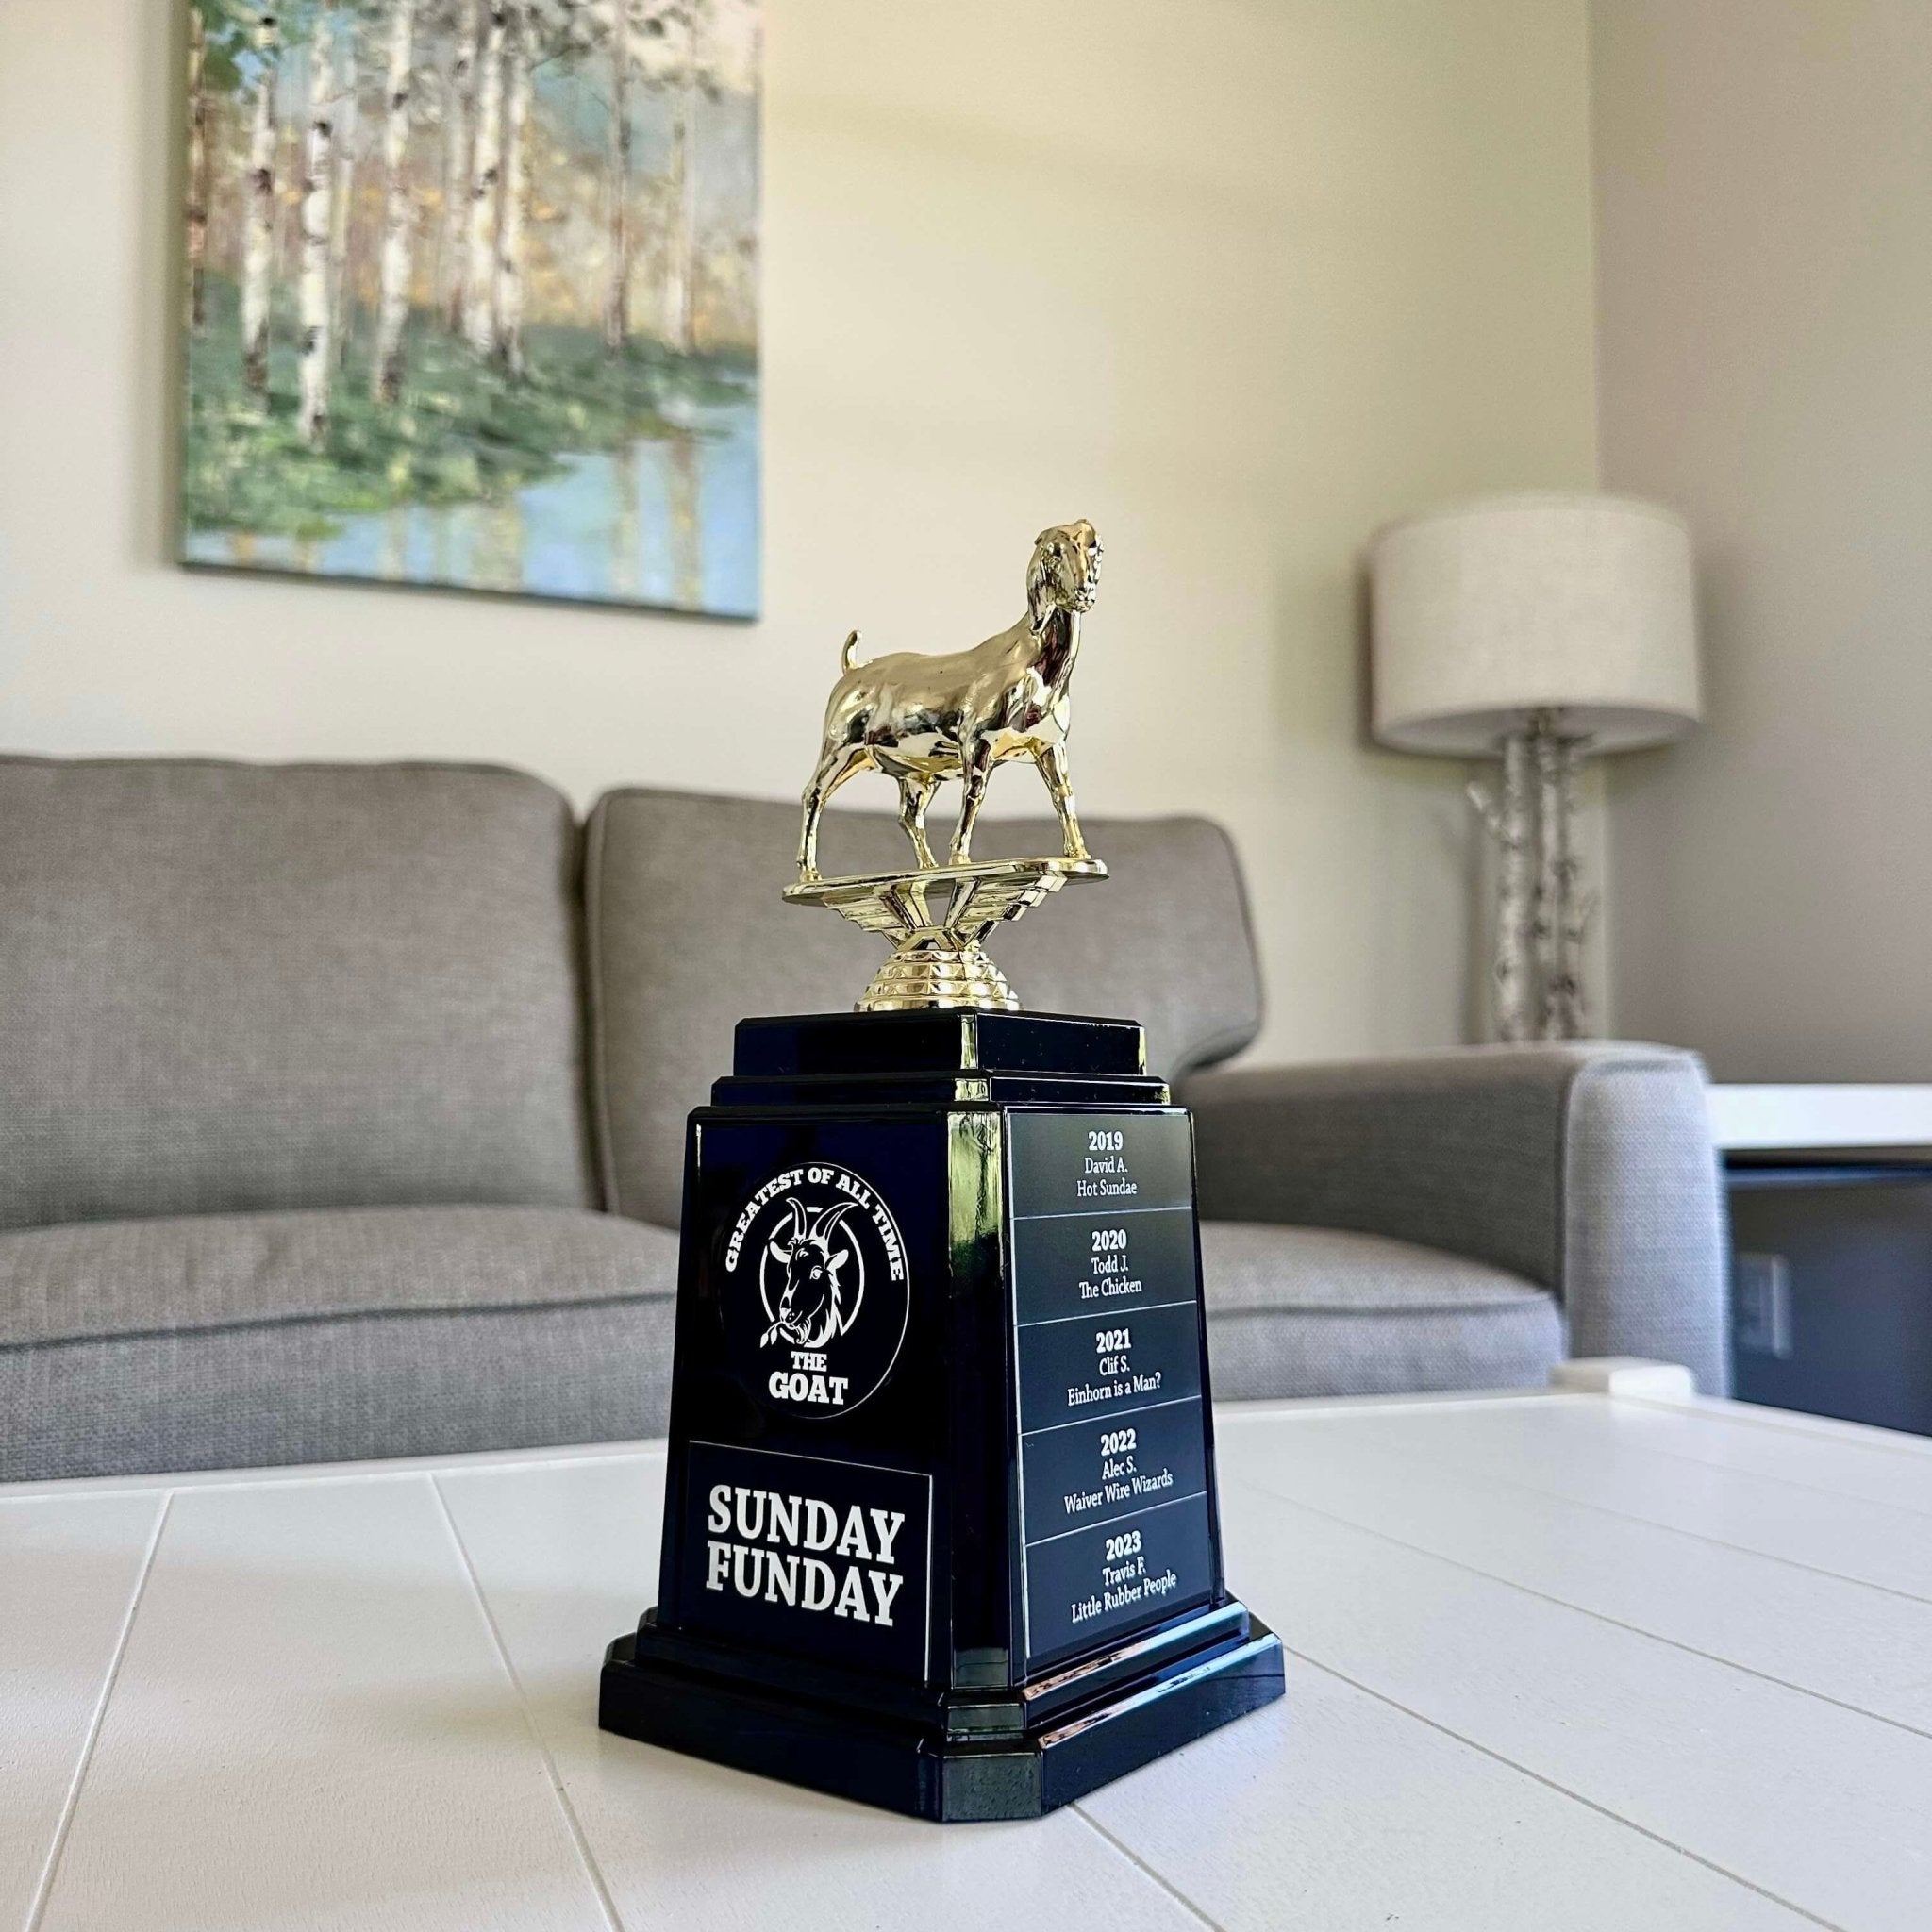 GOAT Trophy Greatest of All Time Award Trophy Hand Painted 